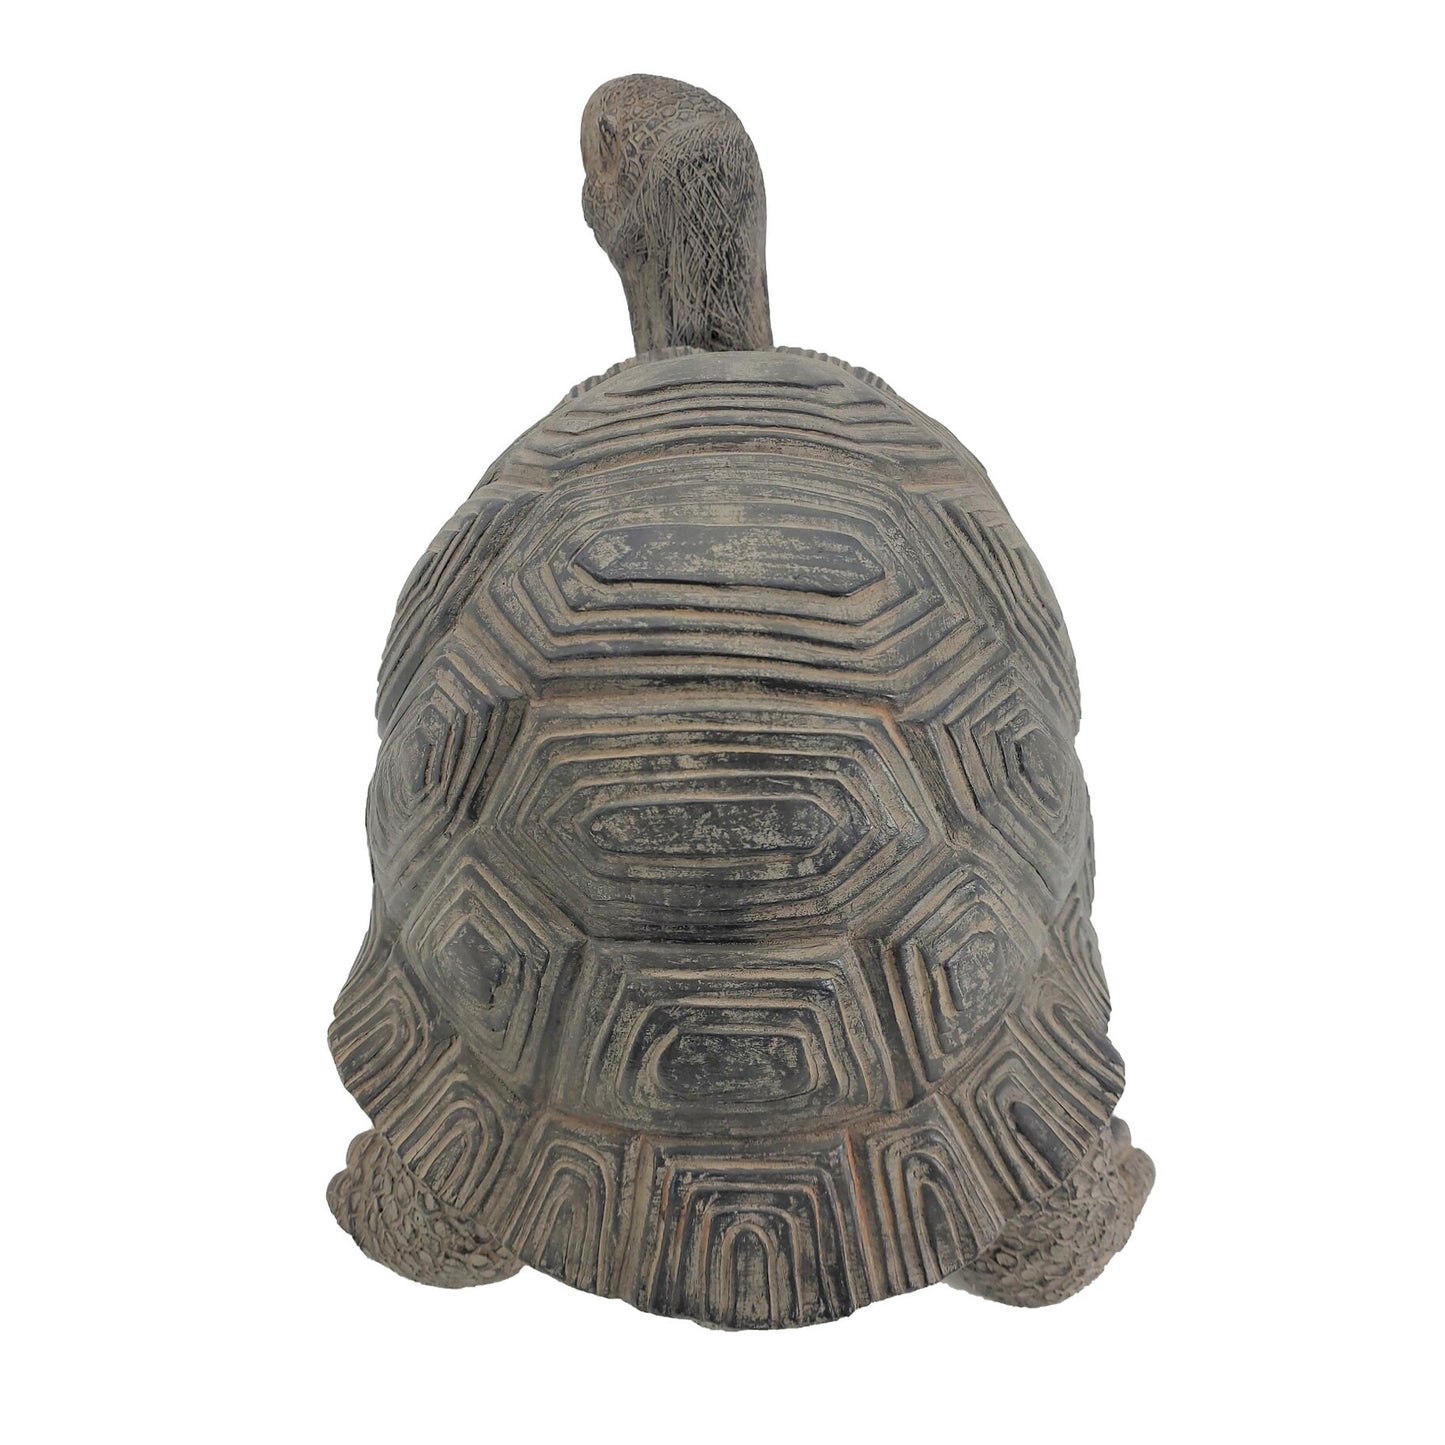 ON SALE NOW! Antique Polyresin Turtle Statue